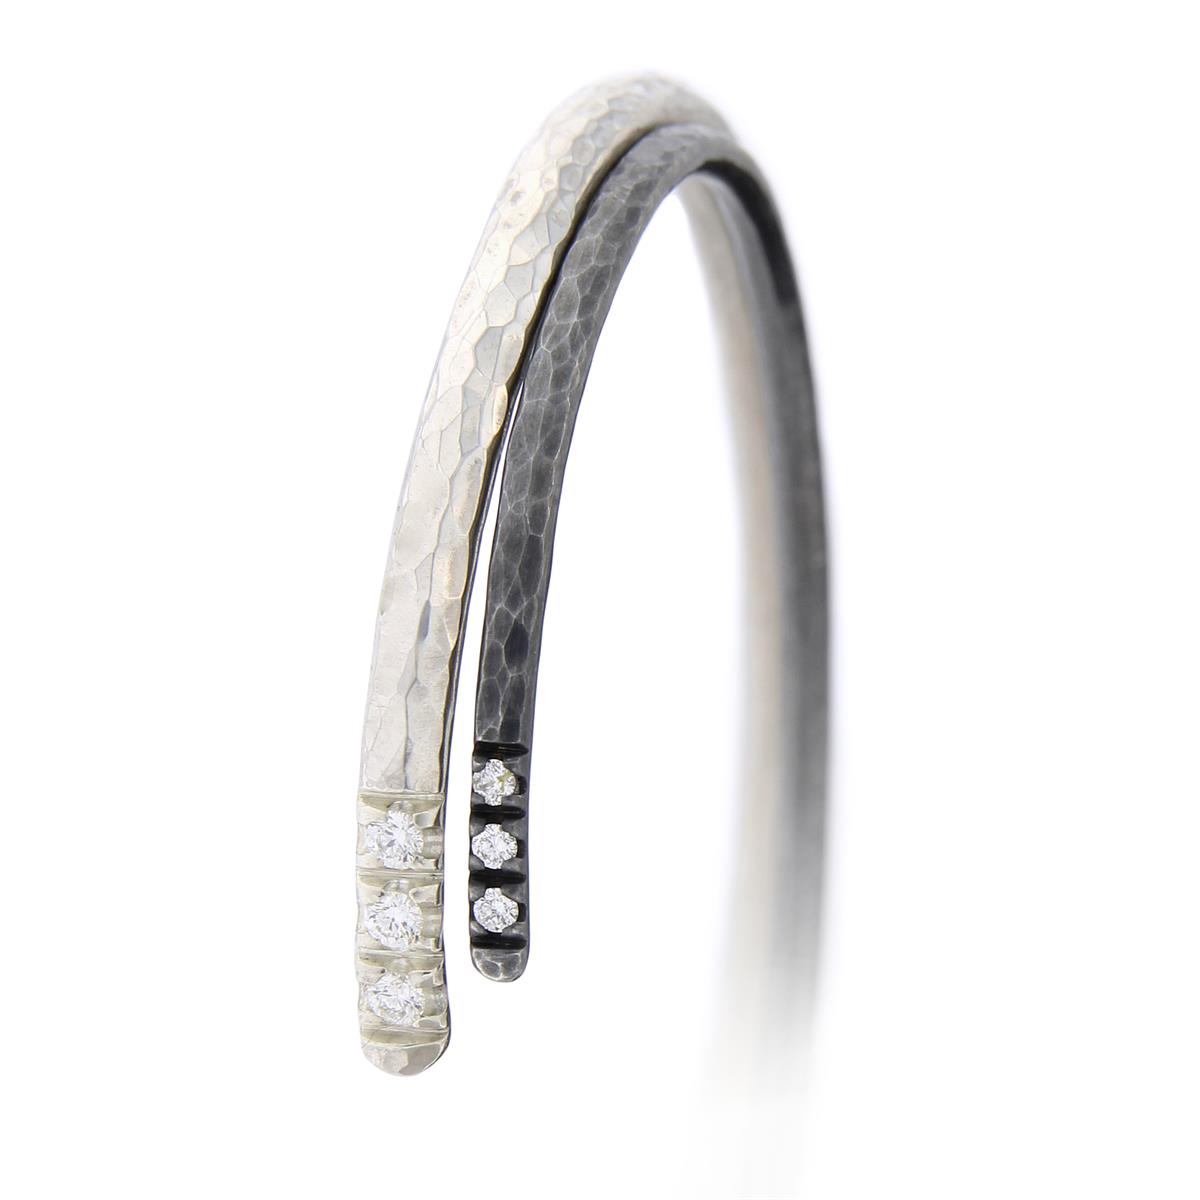 Katie g. Jewellery - Hammered  Bracelet large and small with 3 diamonds each